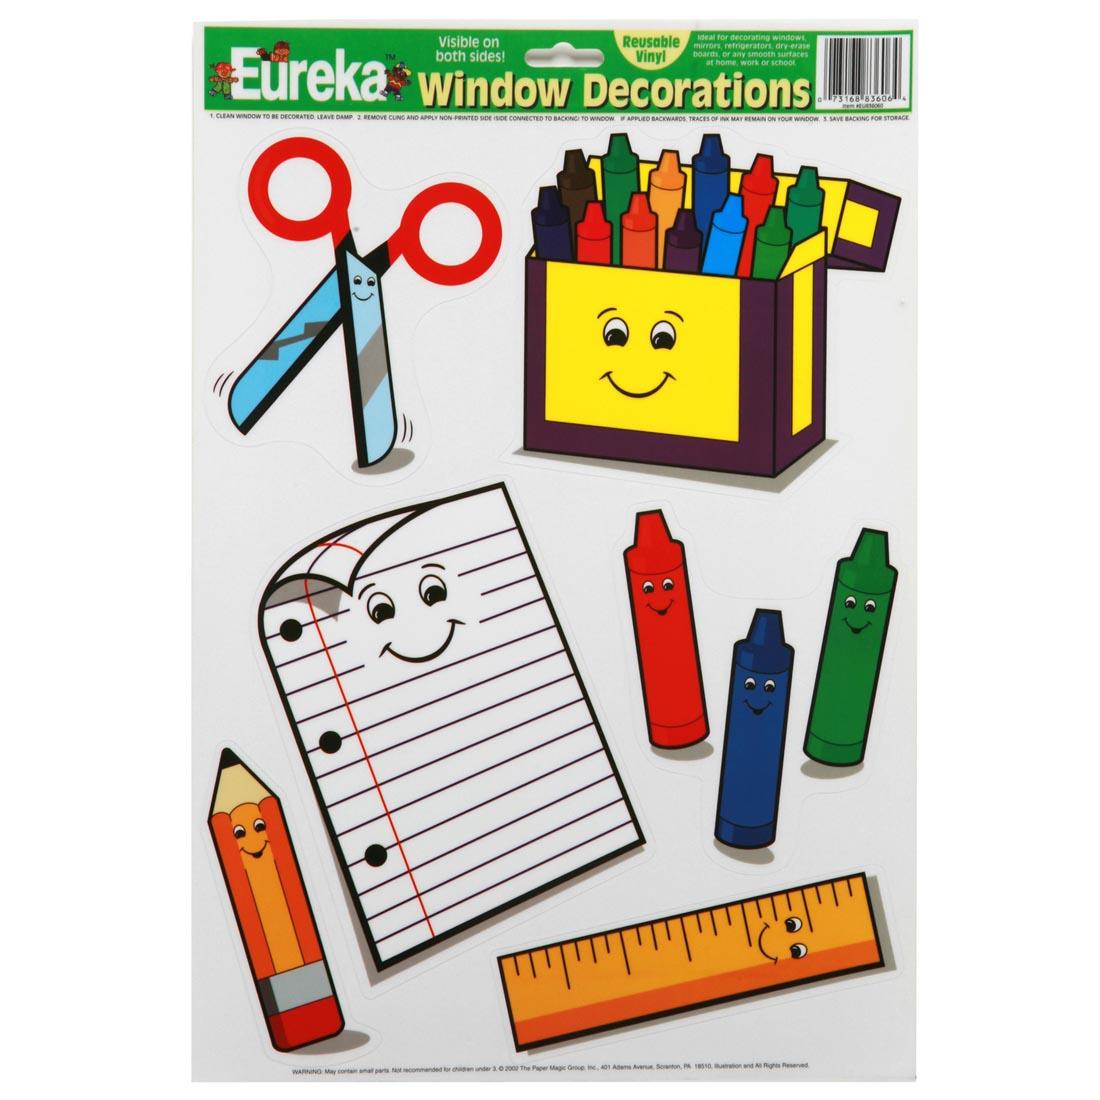 Back to School Window Clings by Eureka include crayons, scissors, paper, pencil and ruler